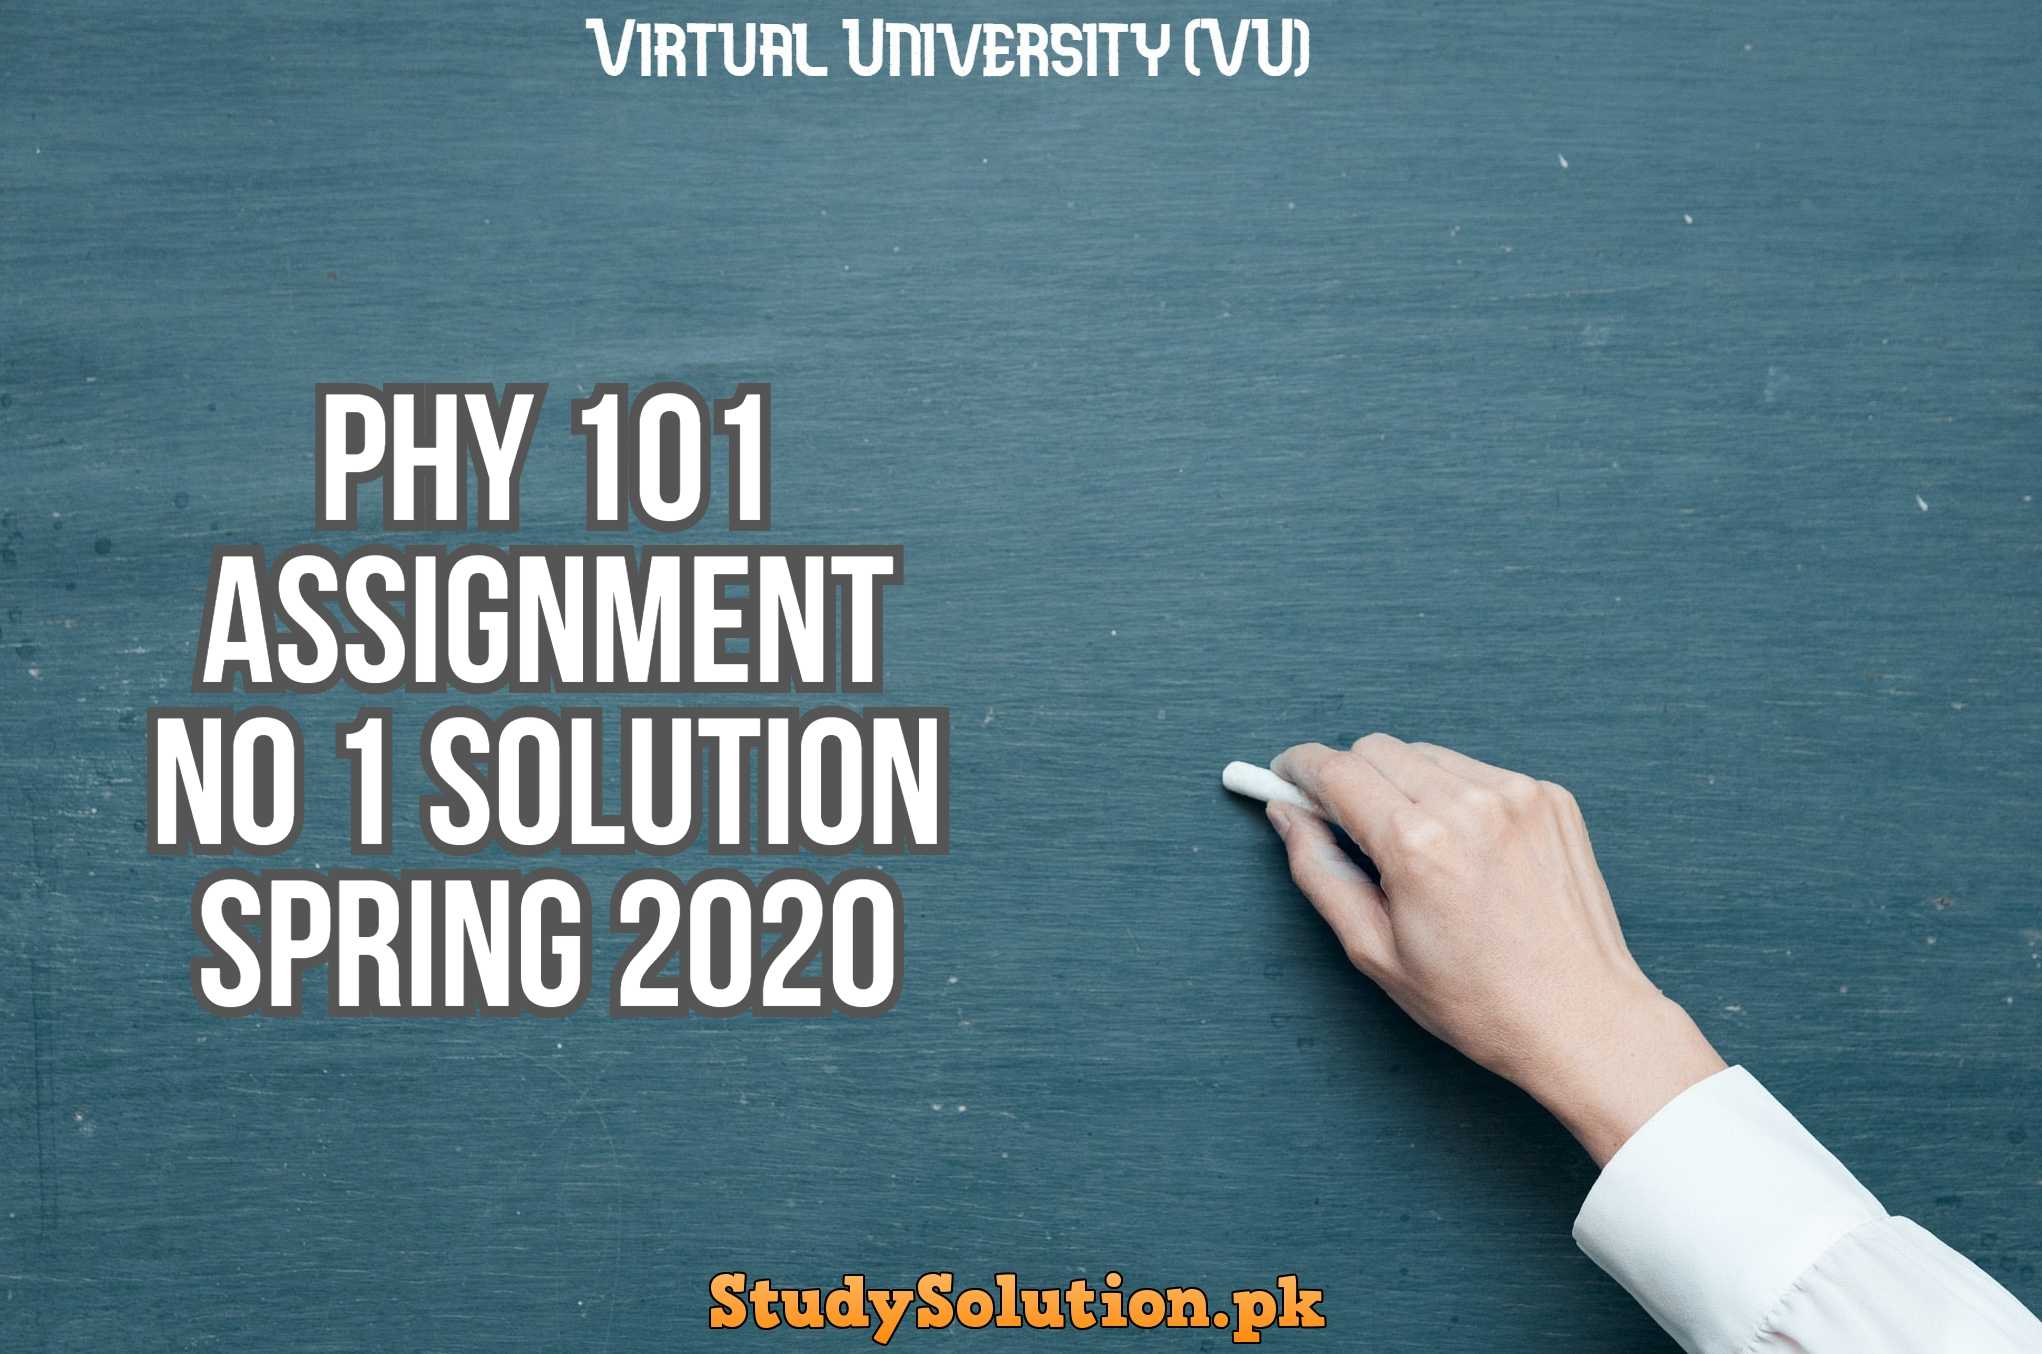 PHY 101 Assignment No 1 Solution Spring 2020